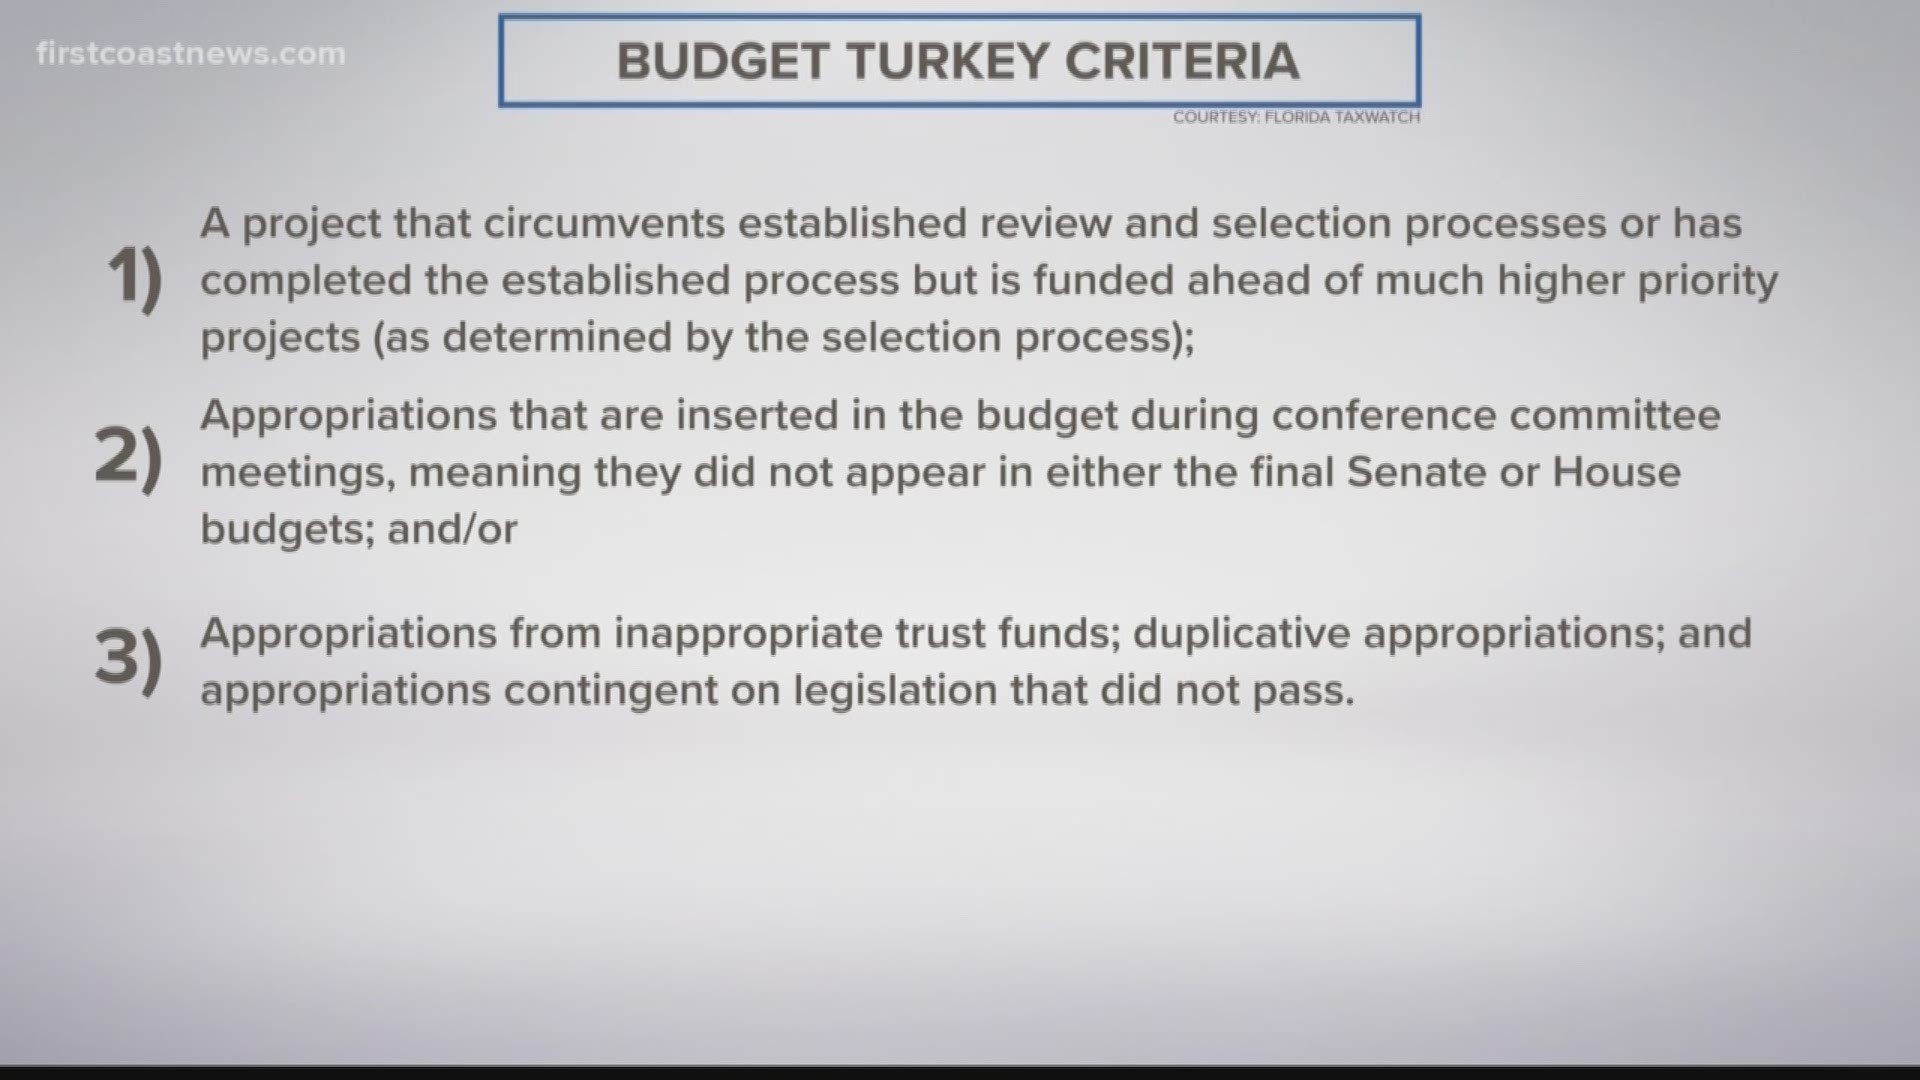 Of that, there are 109 items worth $133 million that qualify as budget turkeys. That's according to a new report out by Florida TaxWatch.